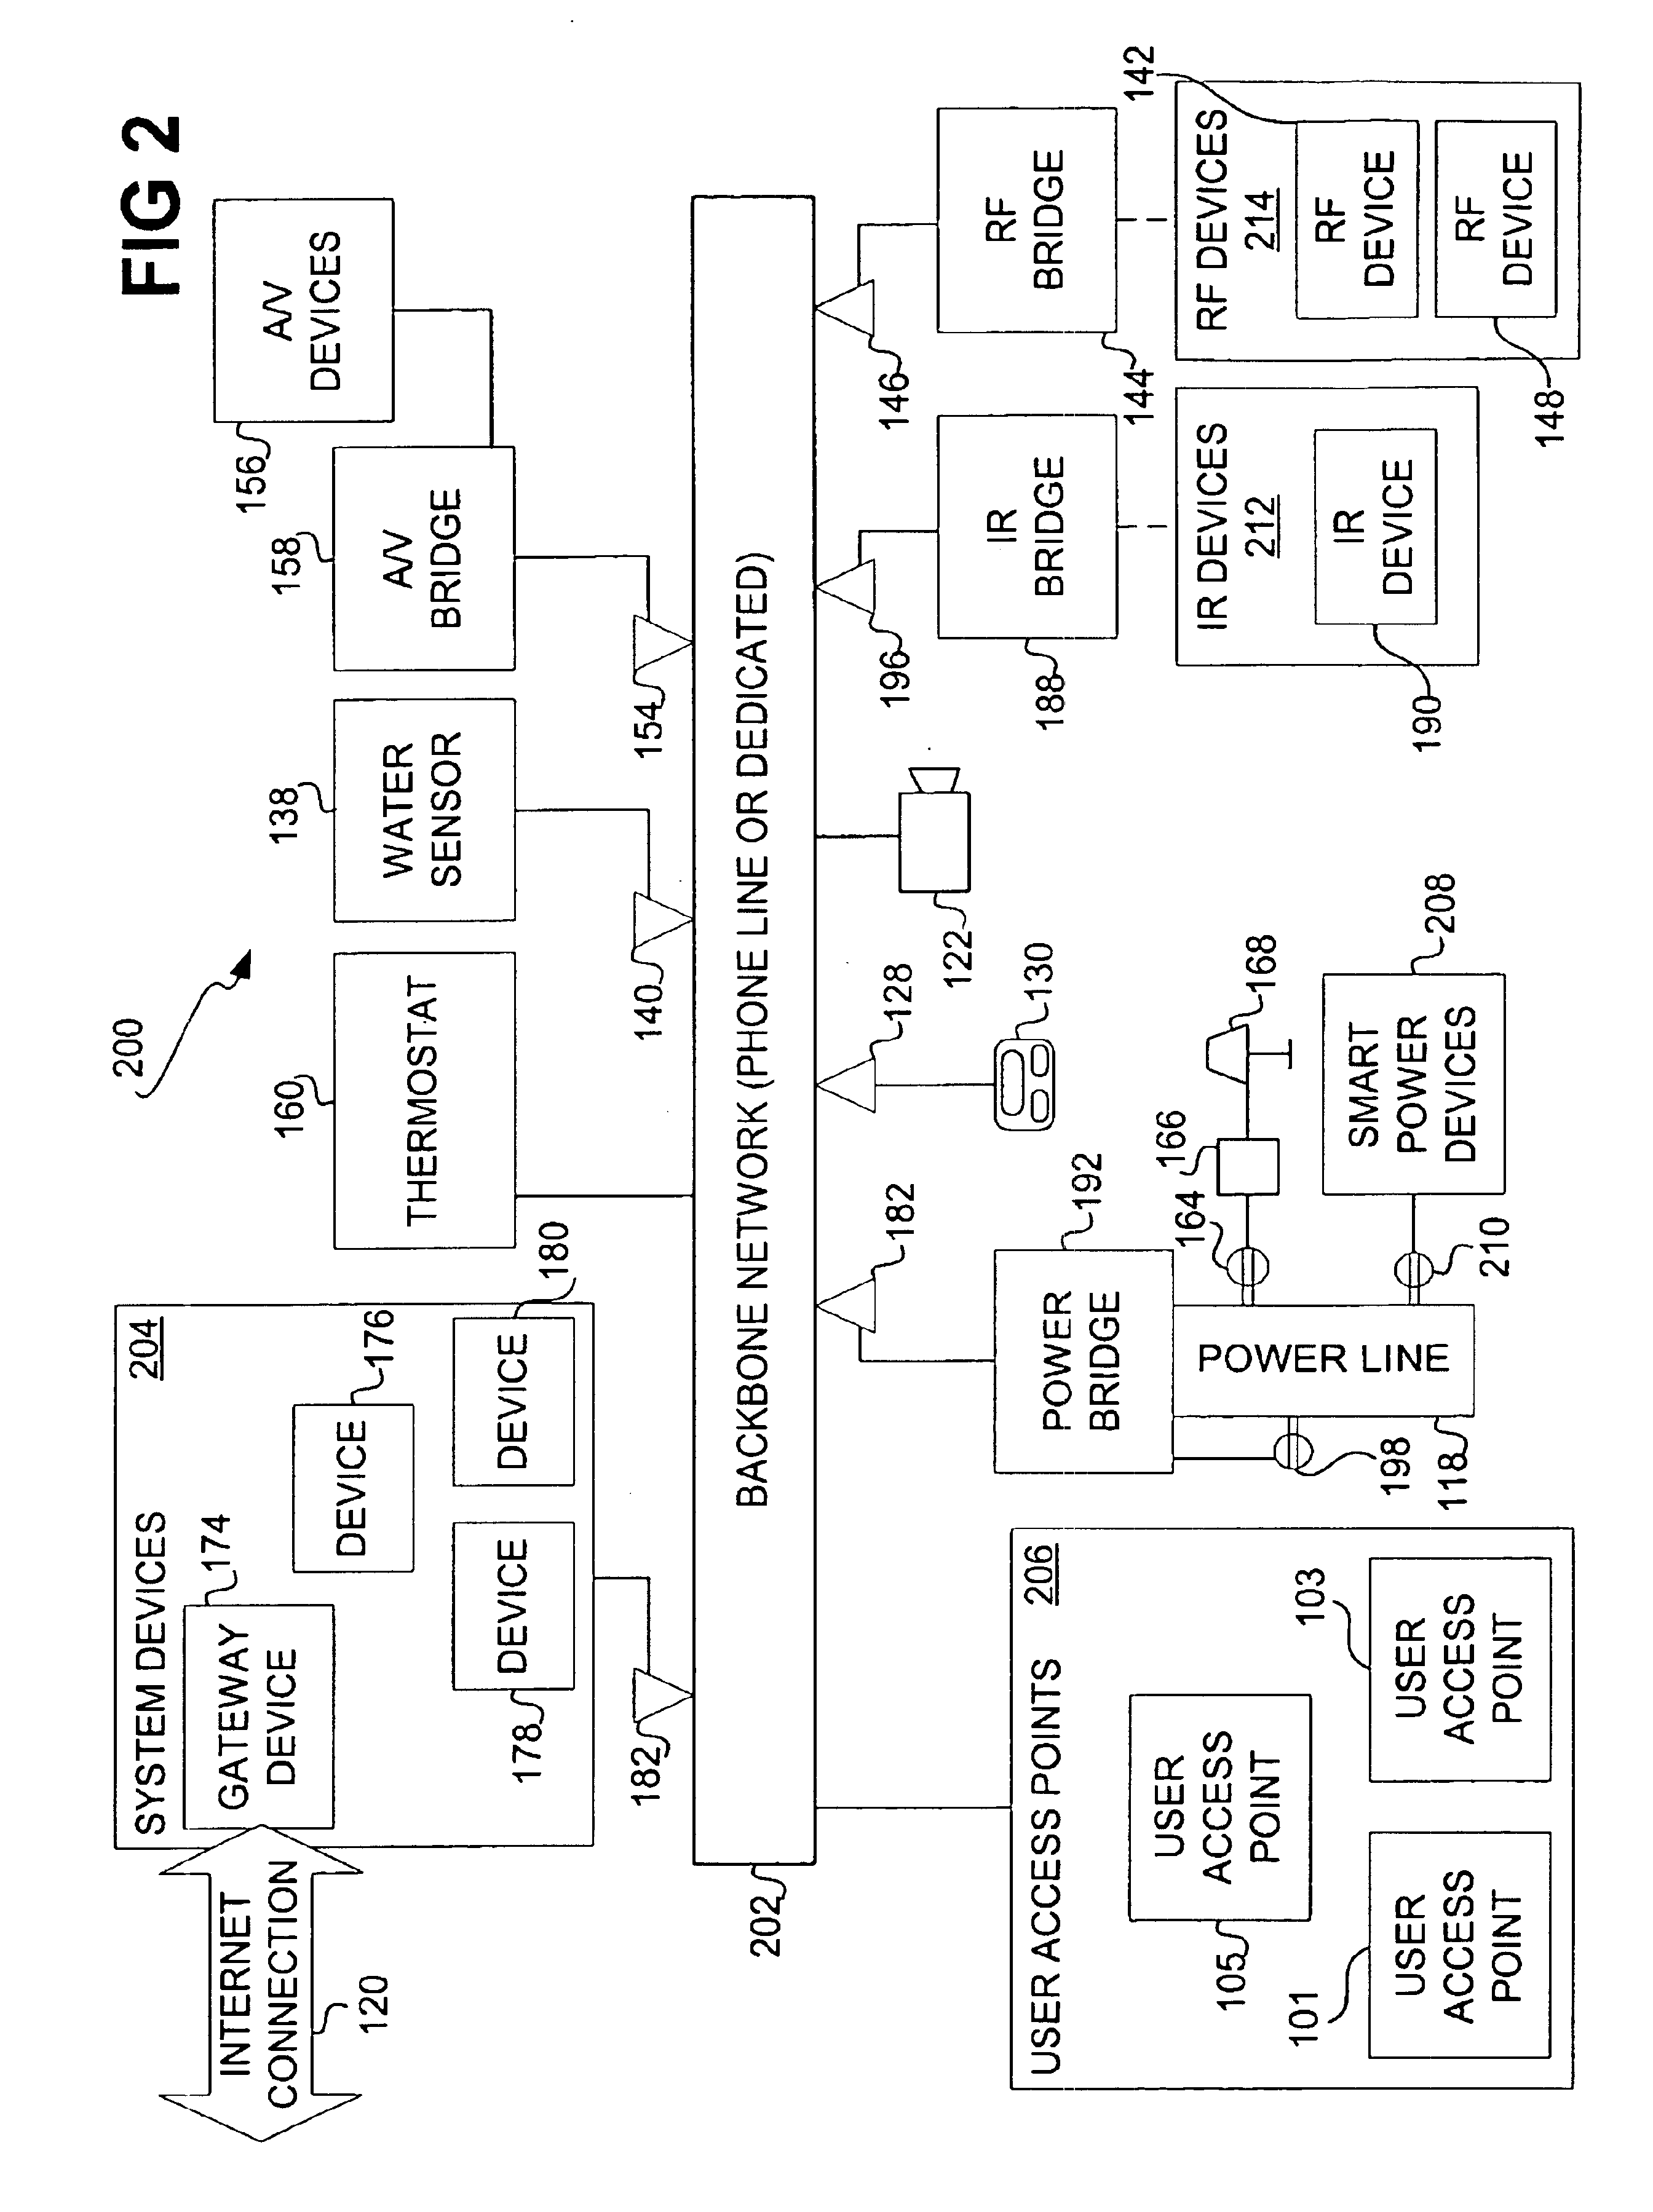 Automation system for controlling and monitoring devices and sensors